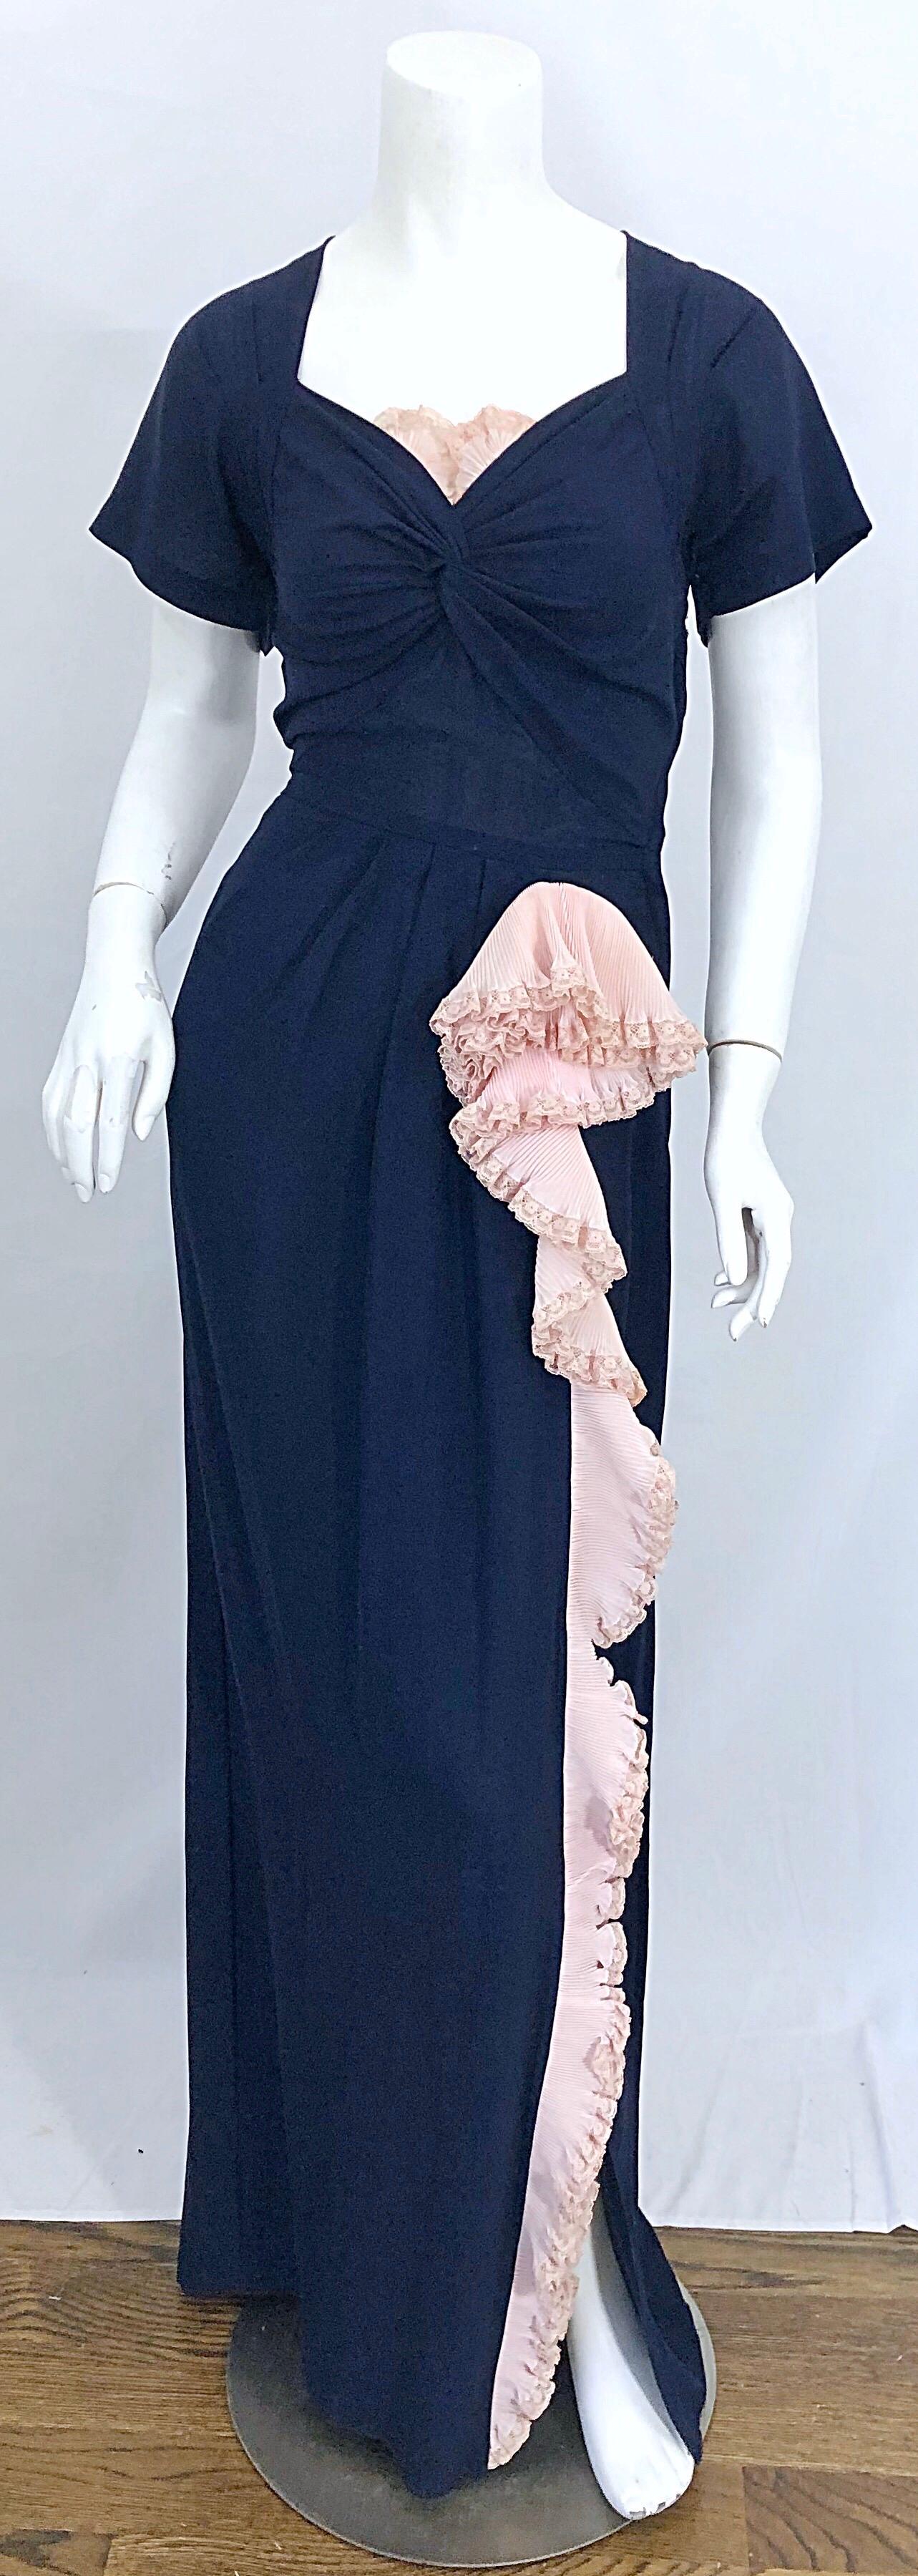 Beautiful vintage 1940s demi couture navy blue and light pink short sleeve crepe gown! Features a gathered sweetheart neckline with pale pink lace above the bust. Pale pink ruffle along the left leg, with a slight slit at the hem. The back of the